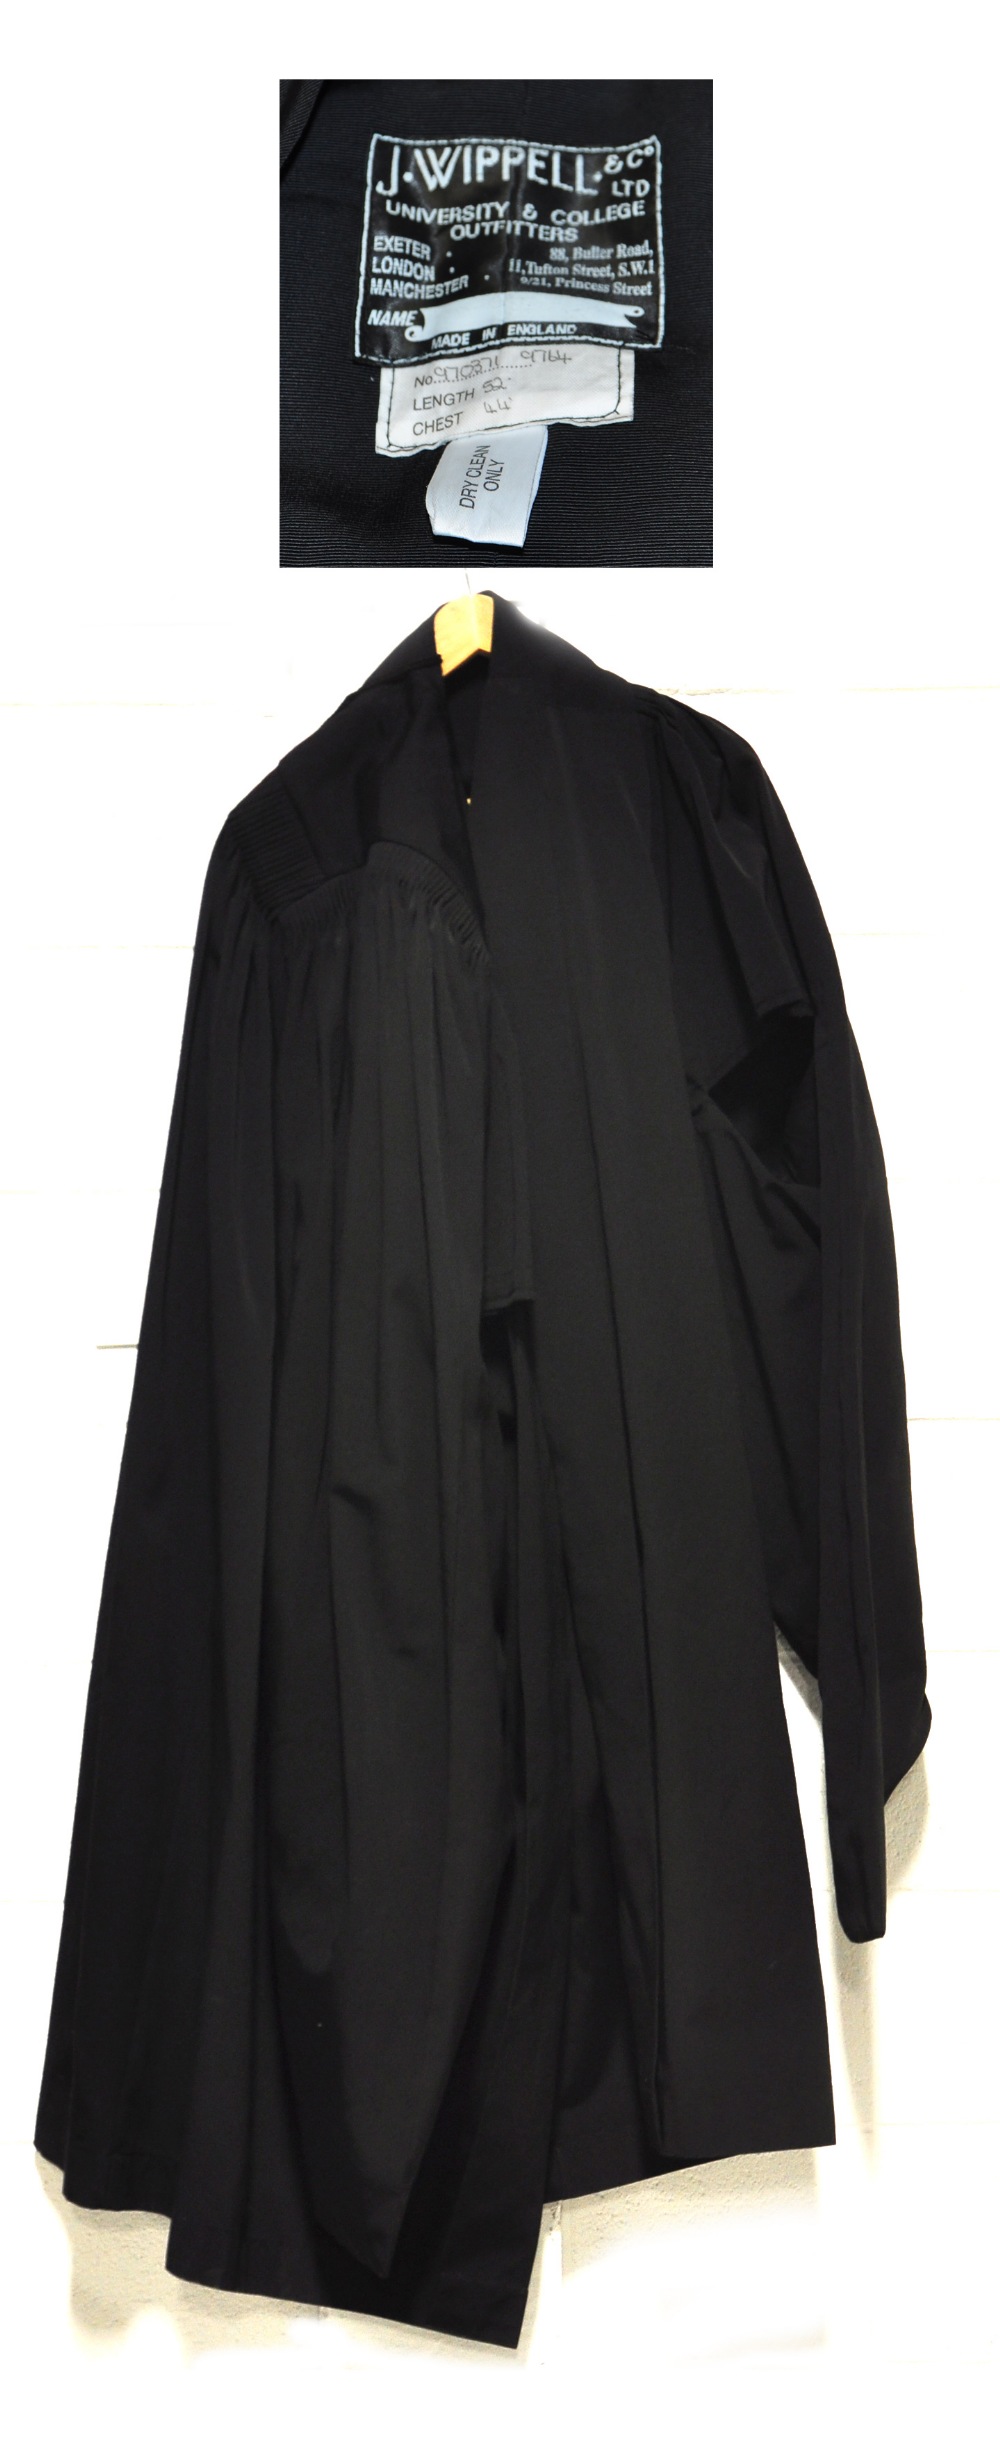 An ecclesiastical/university gown by J.